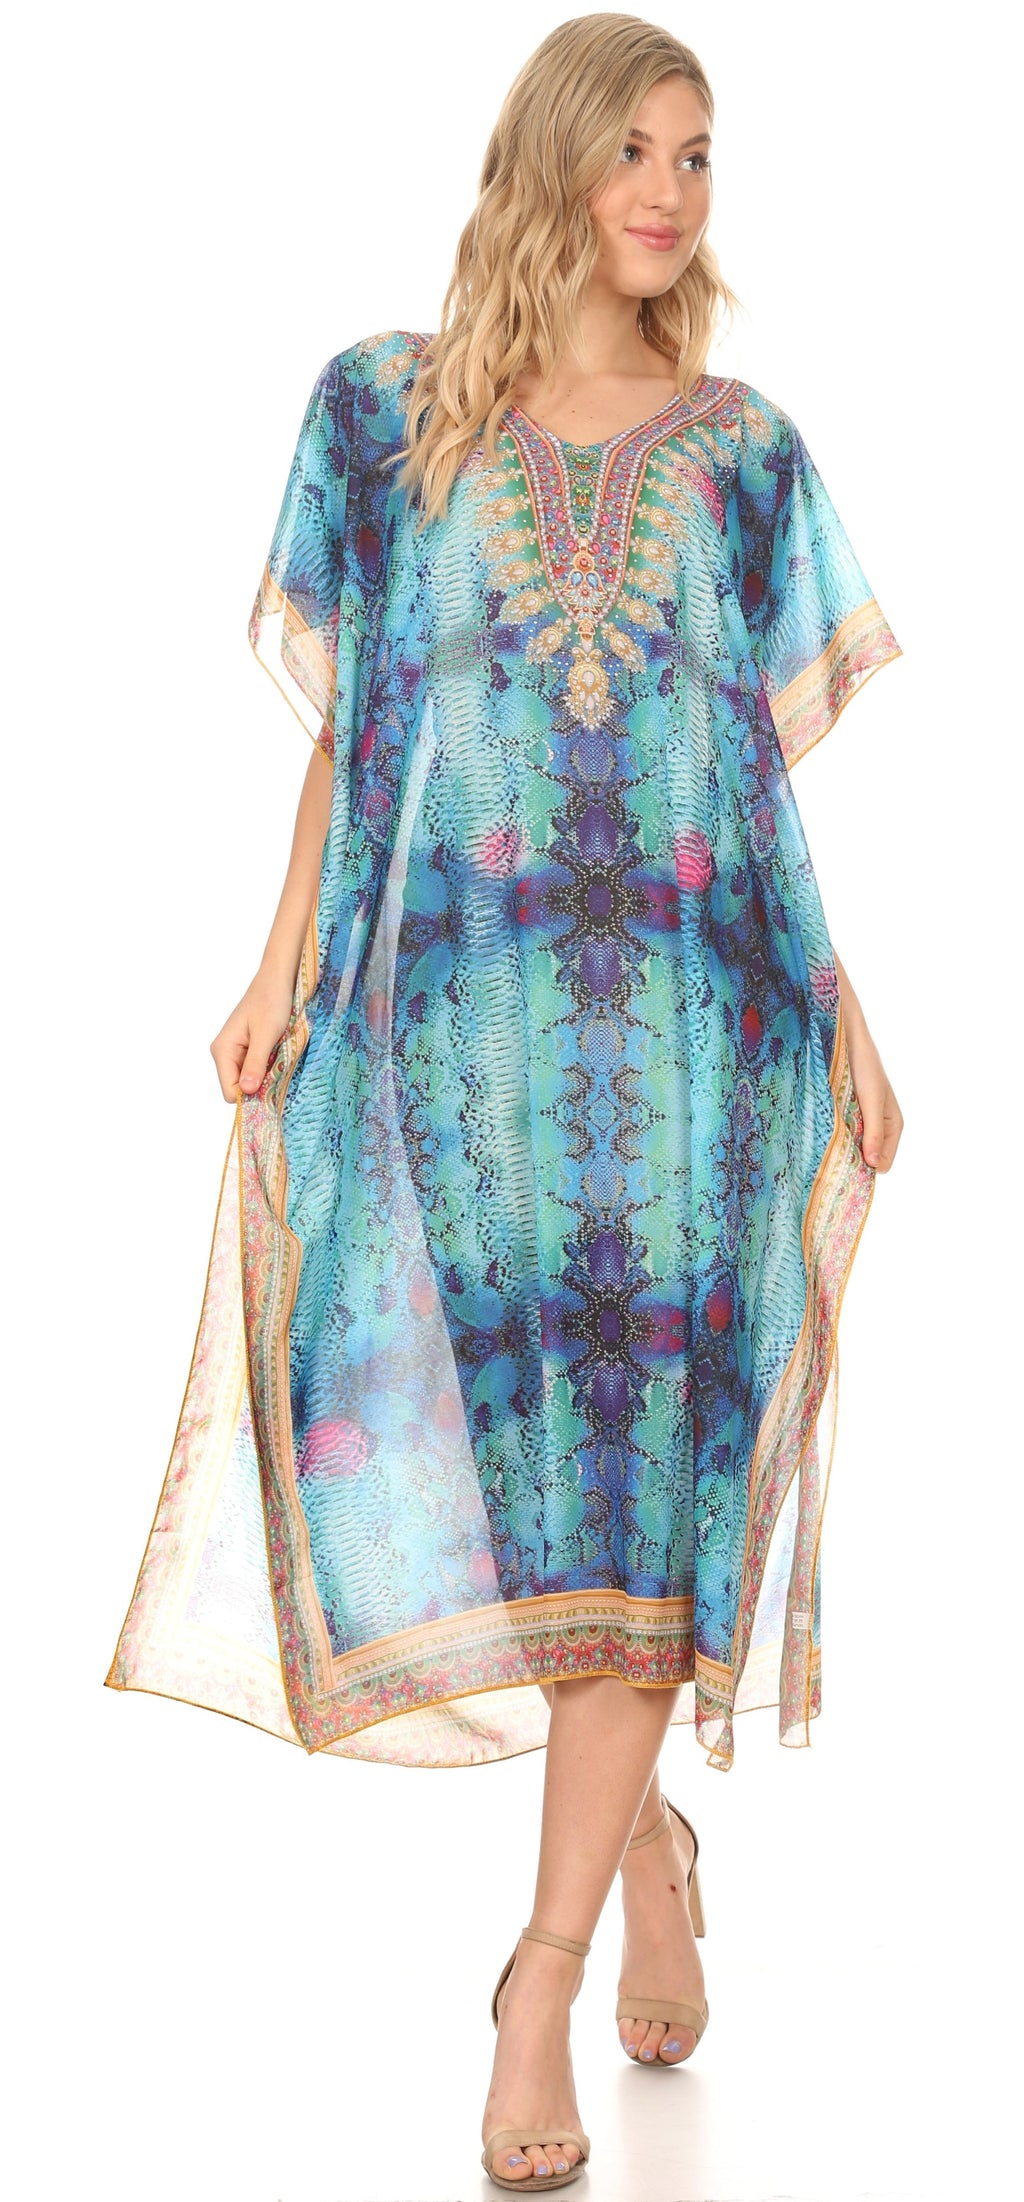 MKY Astryd Women's Flowy Maxi Long Caftan Dress Cover Up with Rhinesto